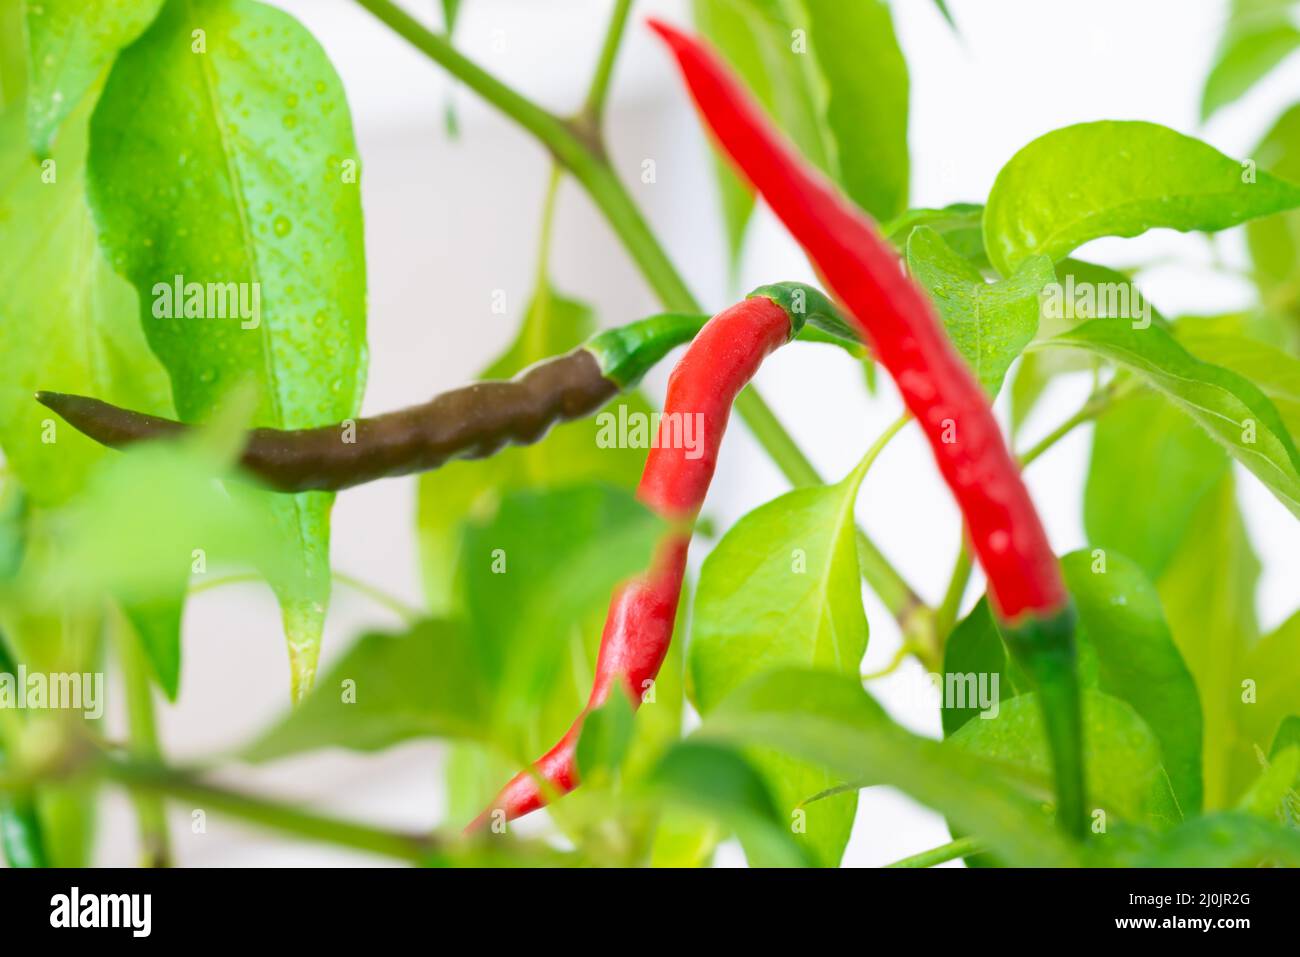 Red and green hot chili peppers Stock Photo